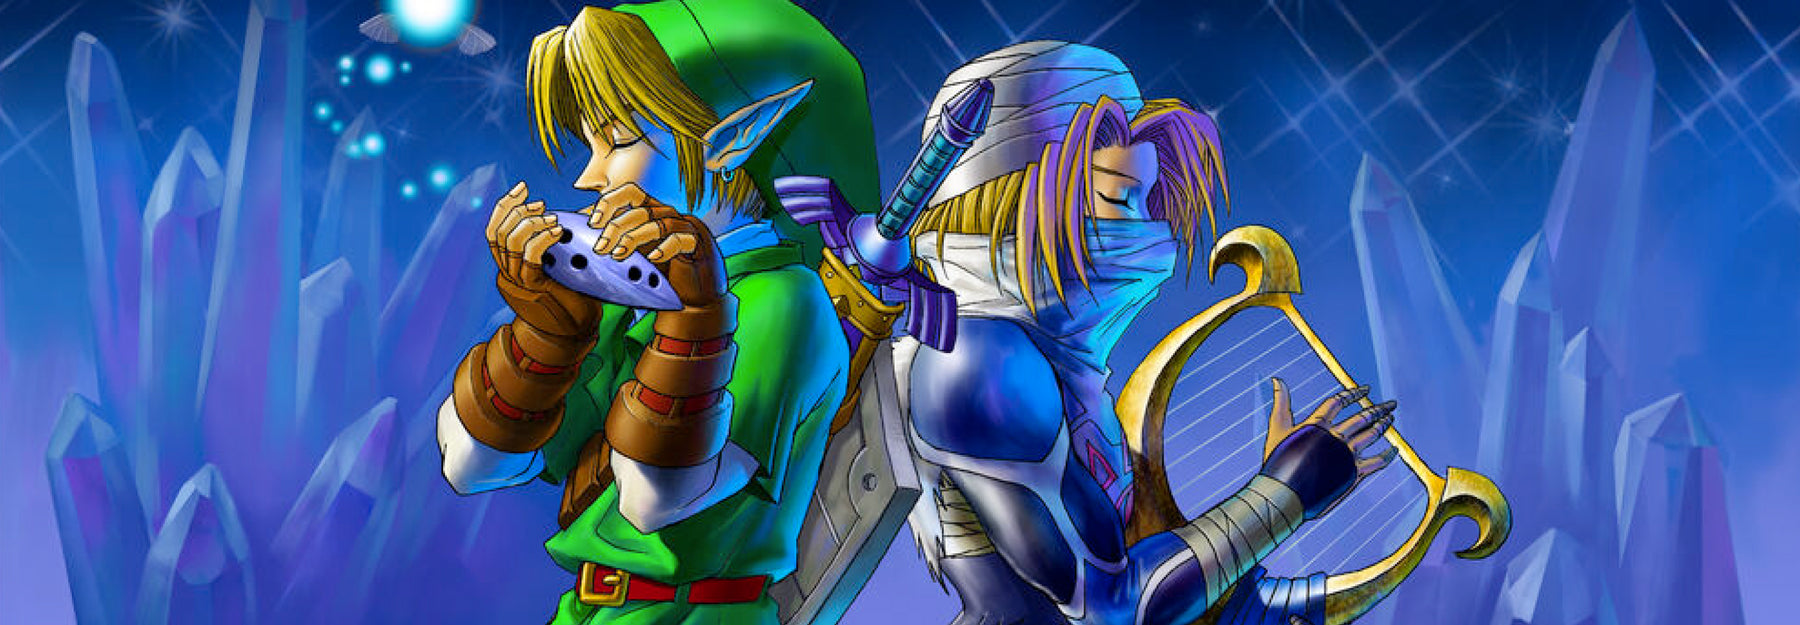 Harmony of Hyrule: A Symphonic Ode to Time - The Music of The Legend of Zelda: Ocarina of Time